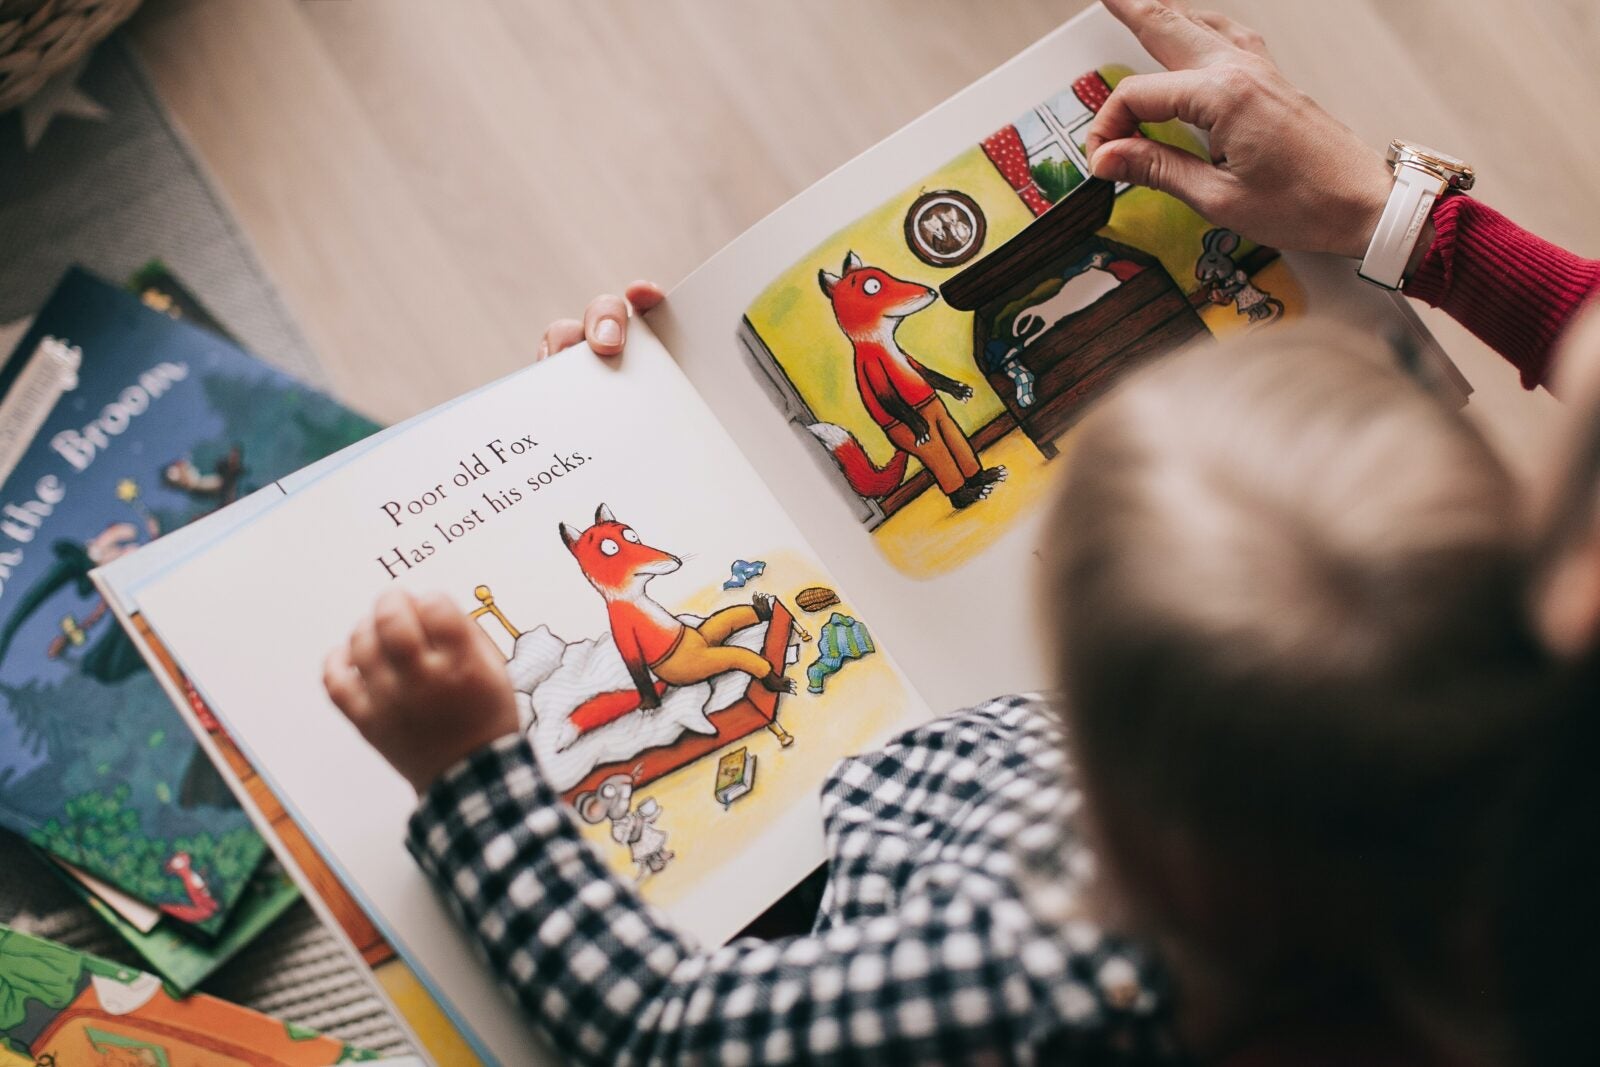 A child reads a children's book that has a fox on it.